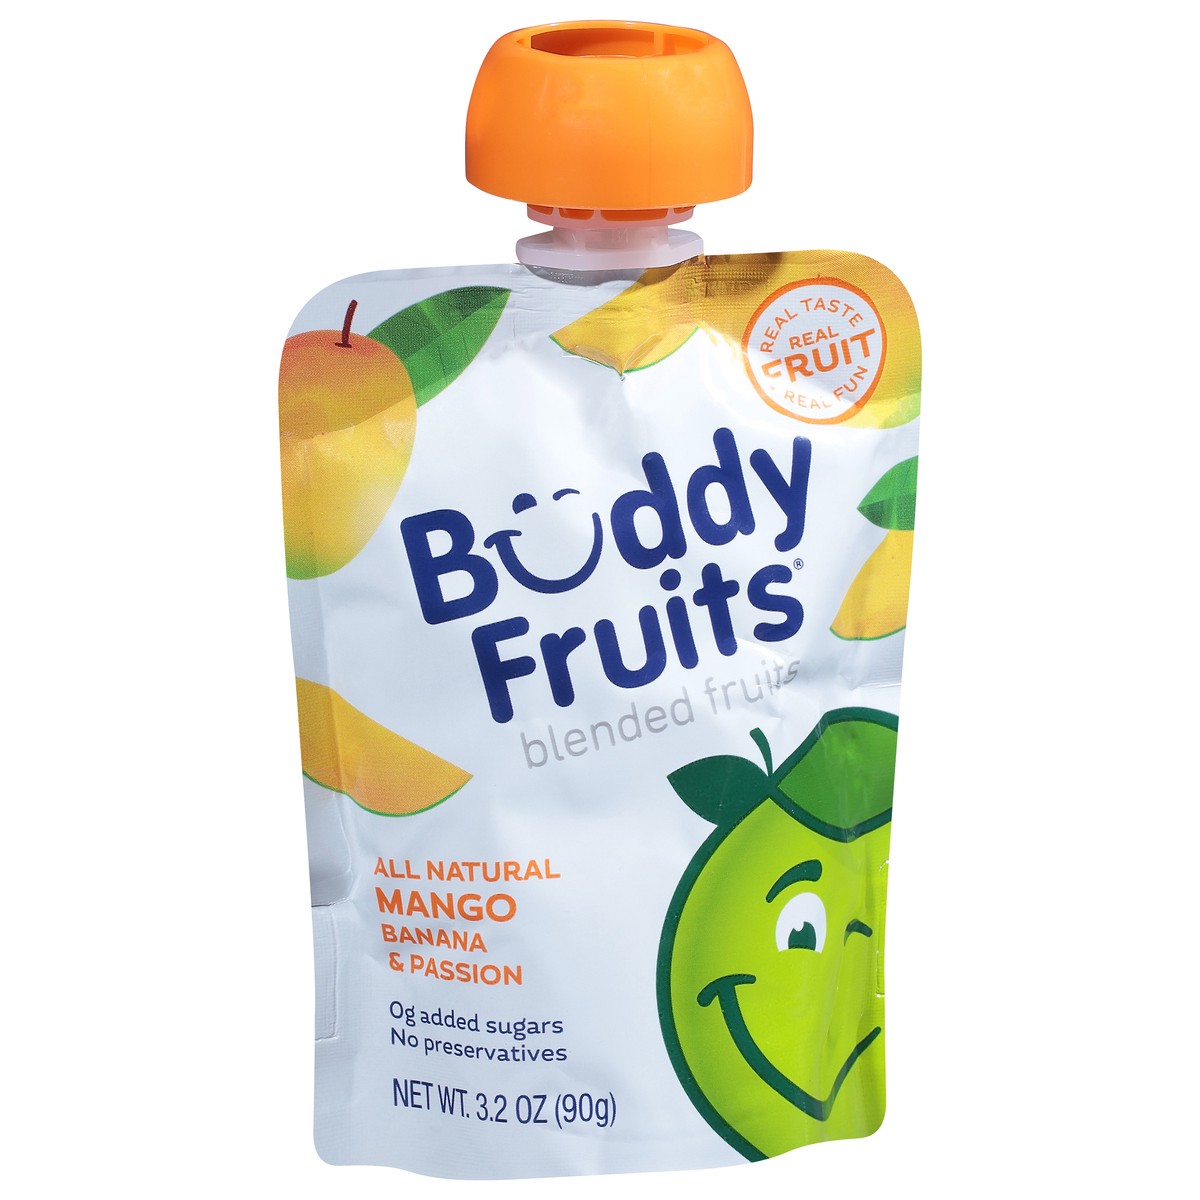 slide 2 of 9, Buddy Fruitss All Natural Mango, Banana & Passion Blended Fruits Pouch, 3.2 oz